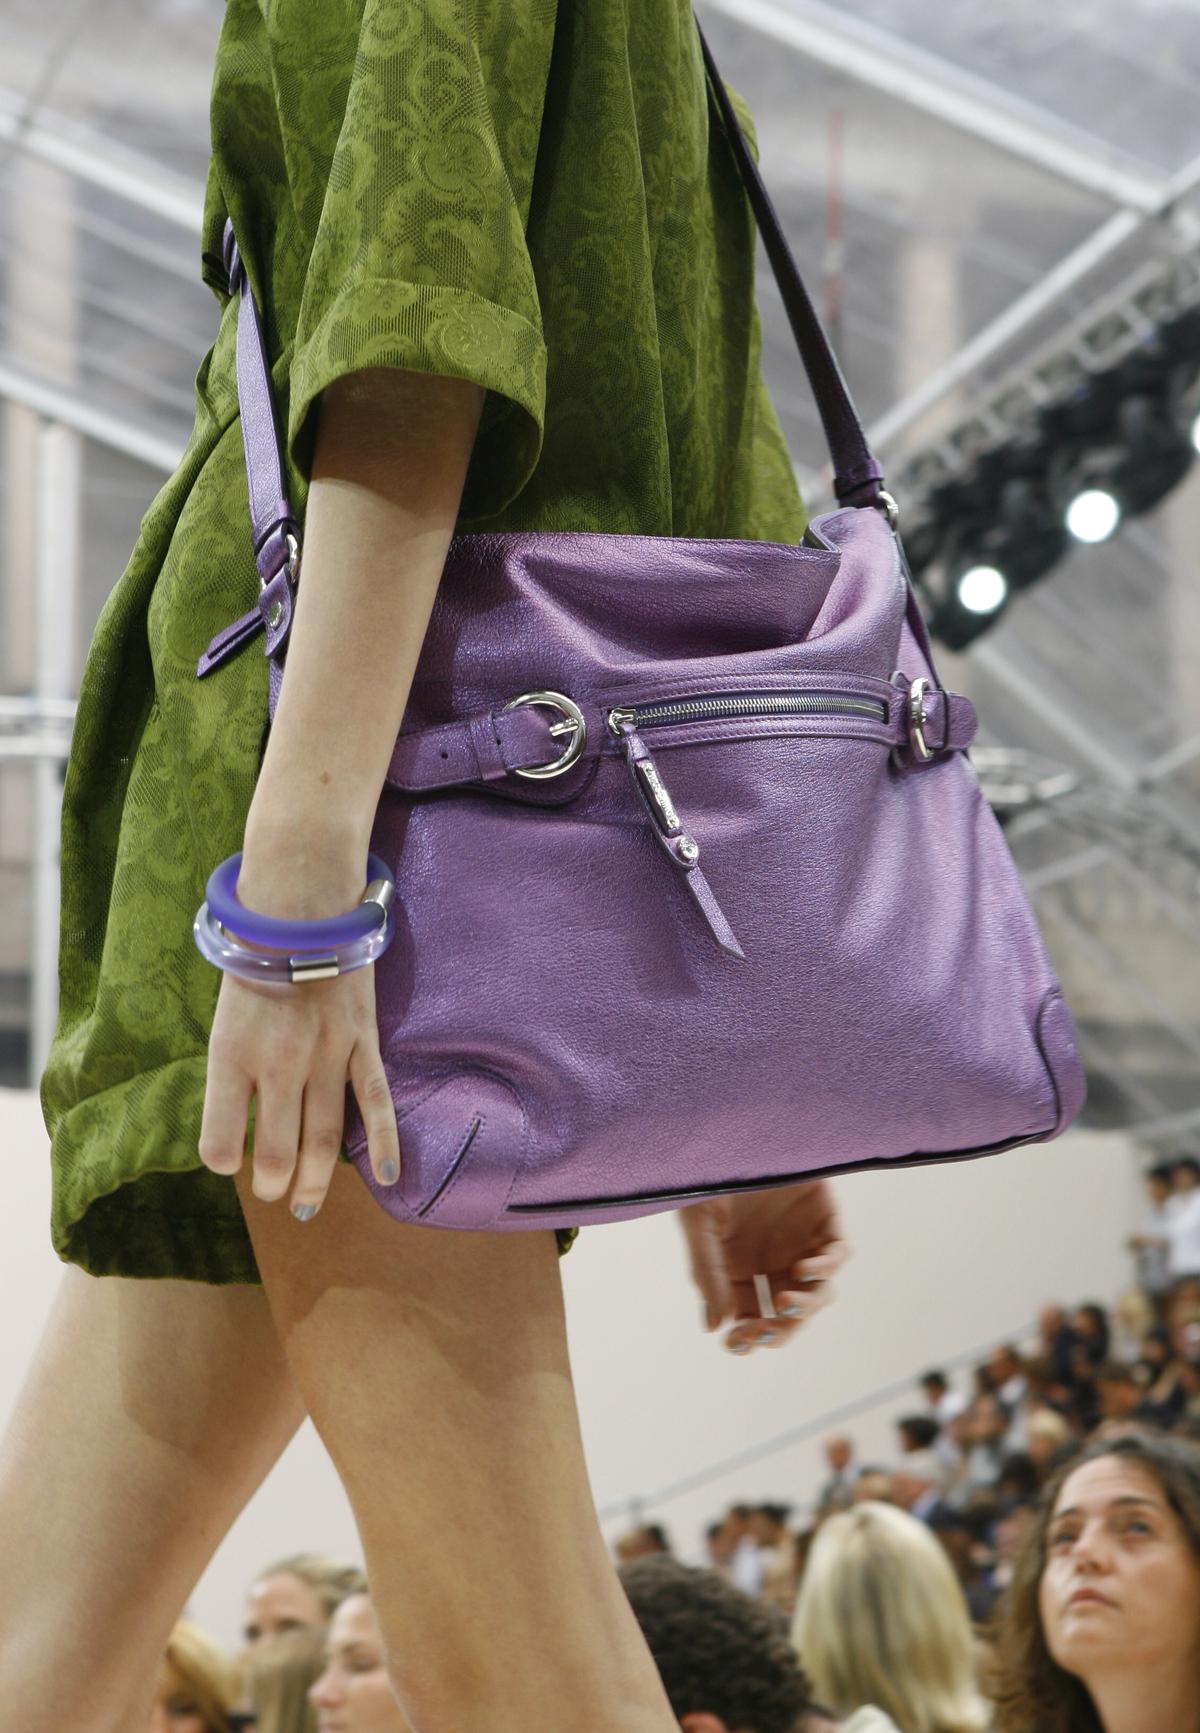 A model sports a purple handbag as part of the Moschino Spring/Summer 2008 collection presented in Milan, Italy on Sept, 25, 2007.